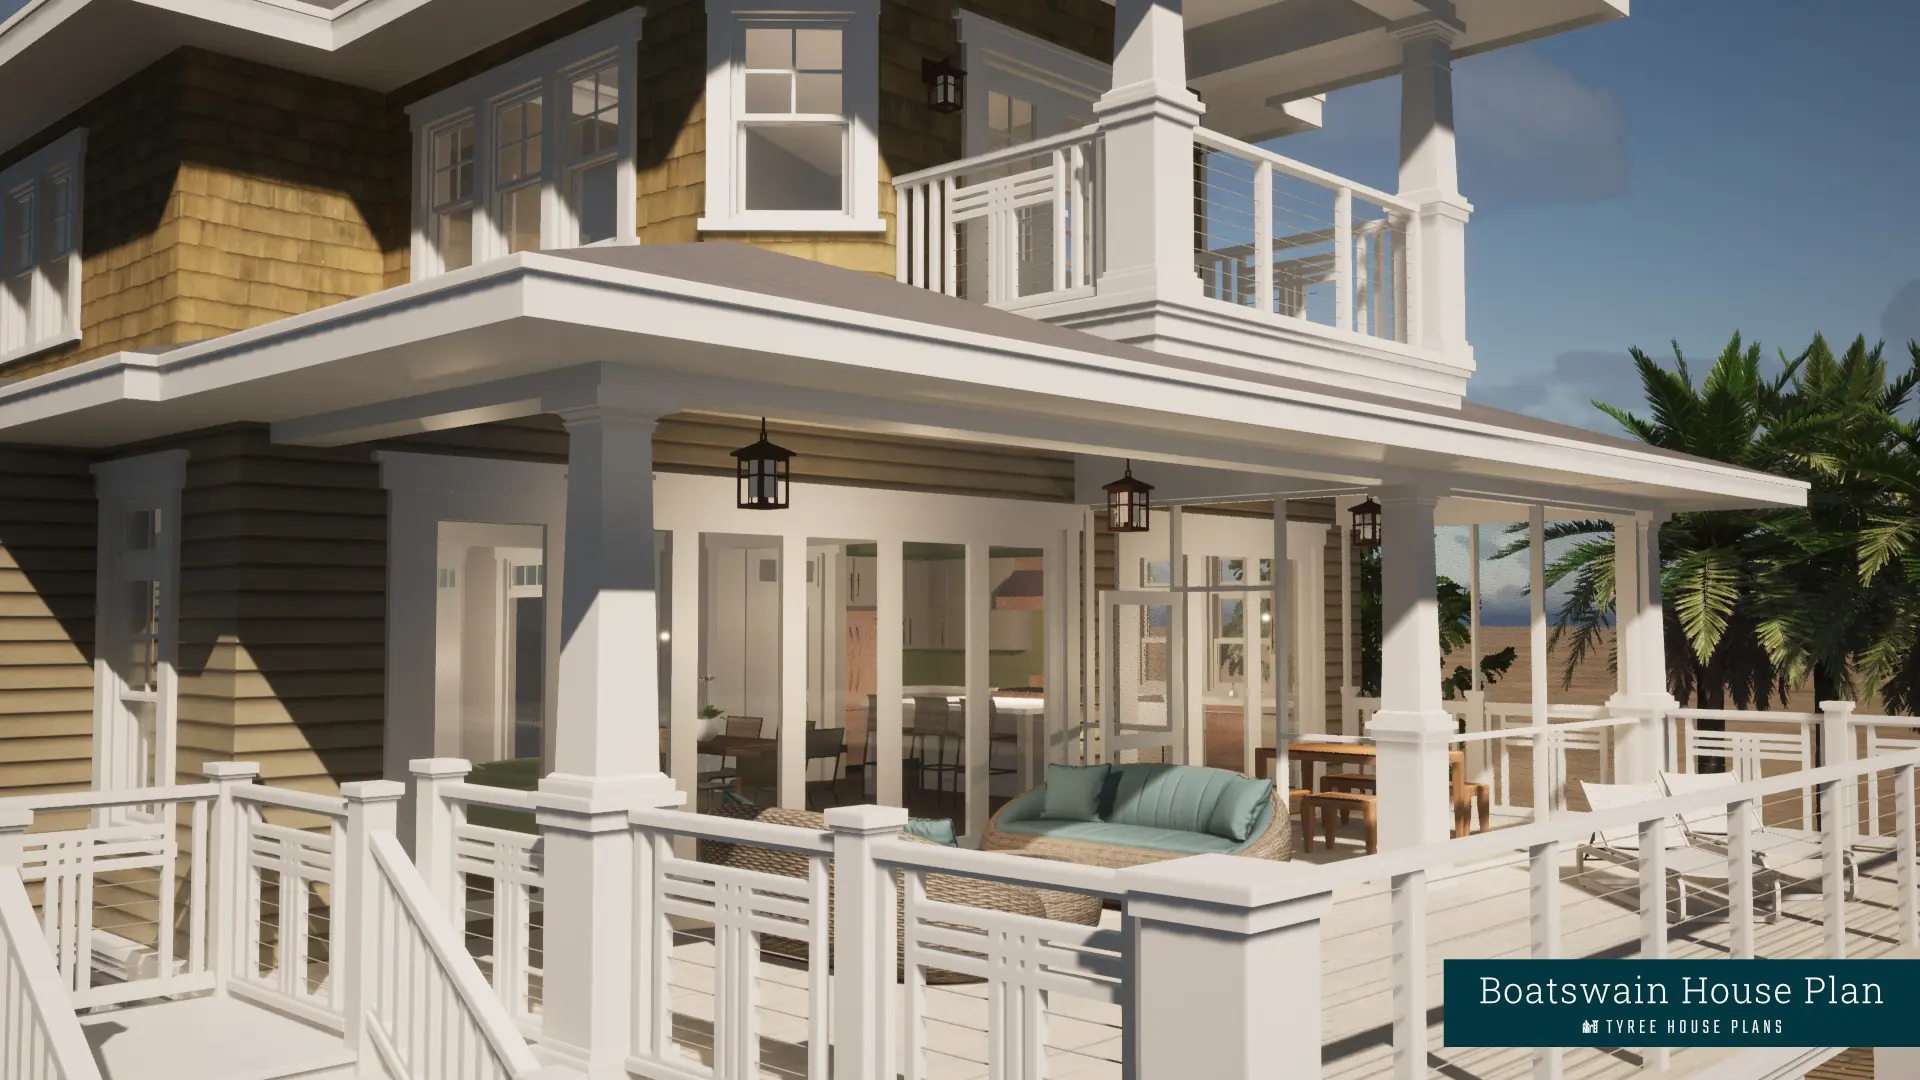 Decorative railings at rear porches. Boatswain by Tyree House Plans.